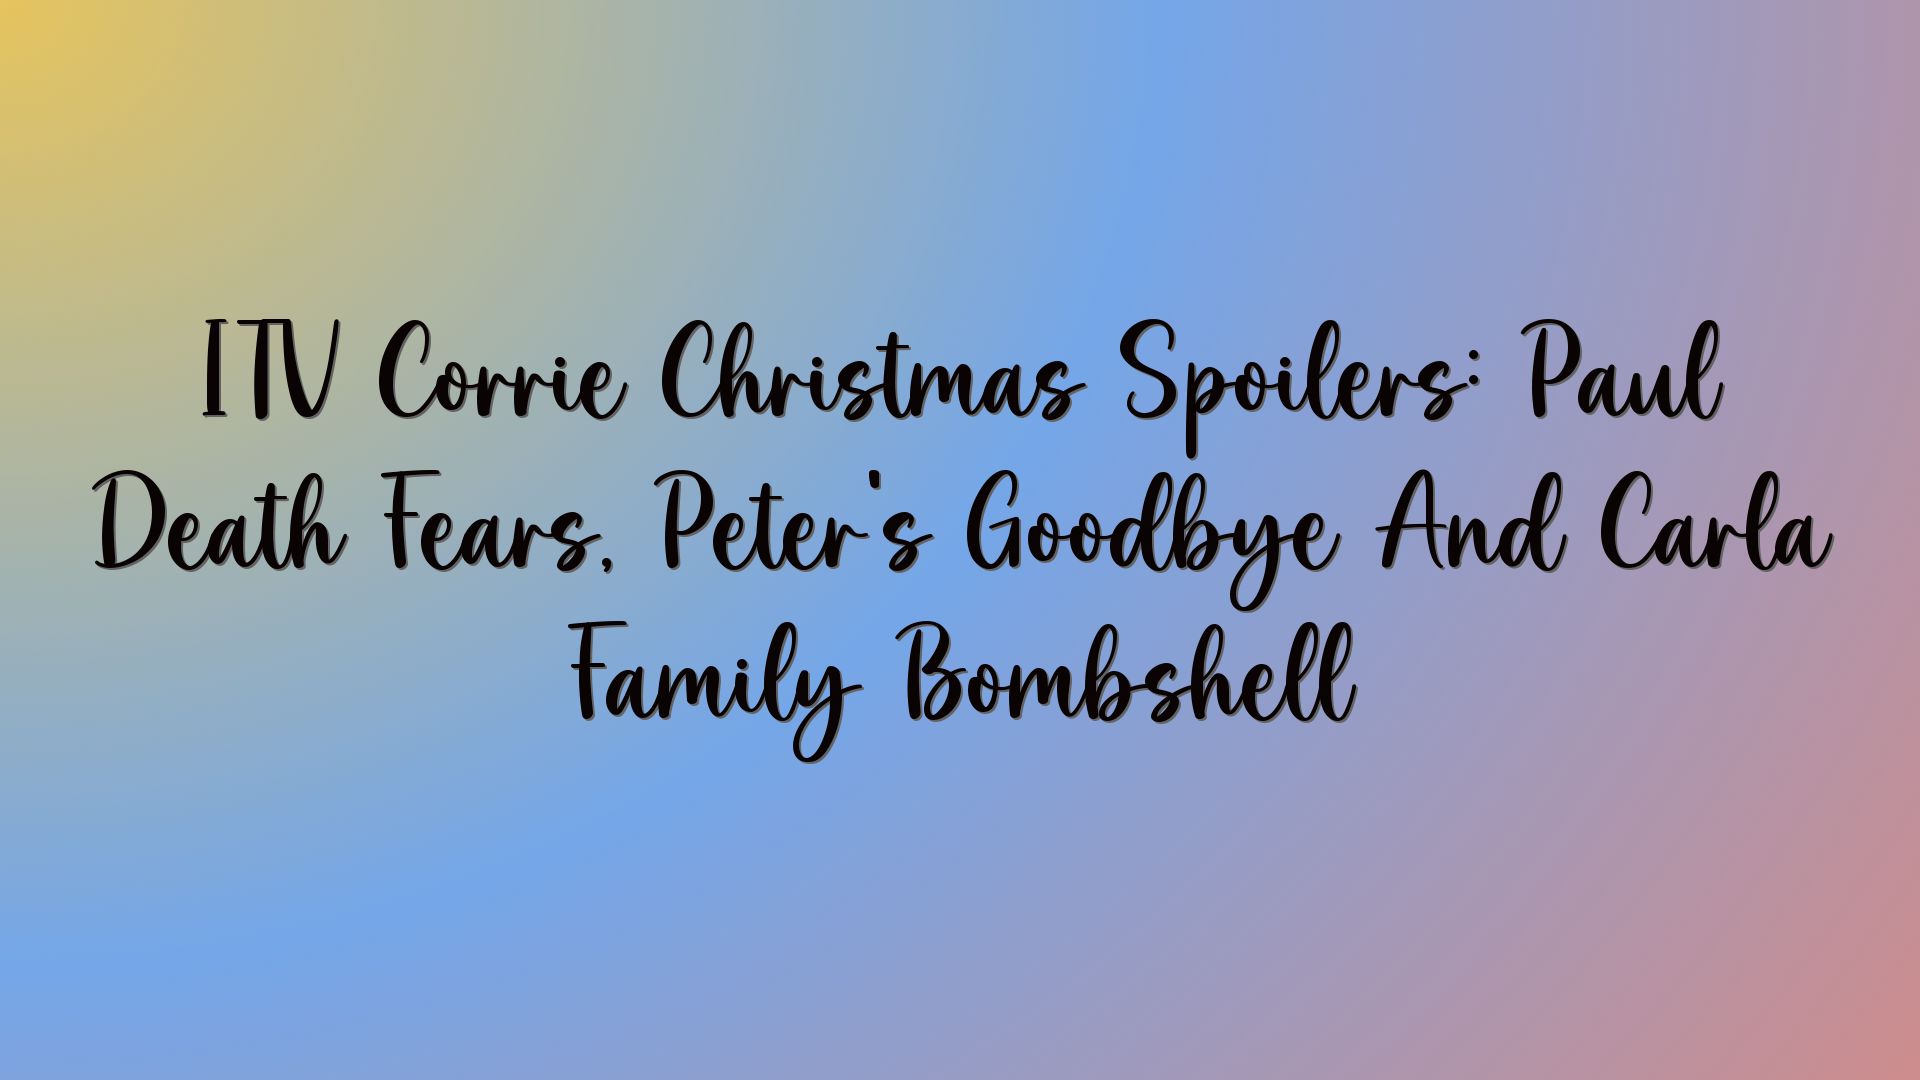 ITV Corrie Christmas Spoilers: Paul Death Fears, Peter’s Goodbye And Carla Family Bombshell